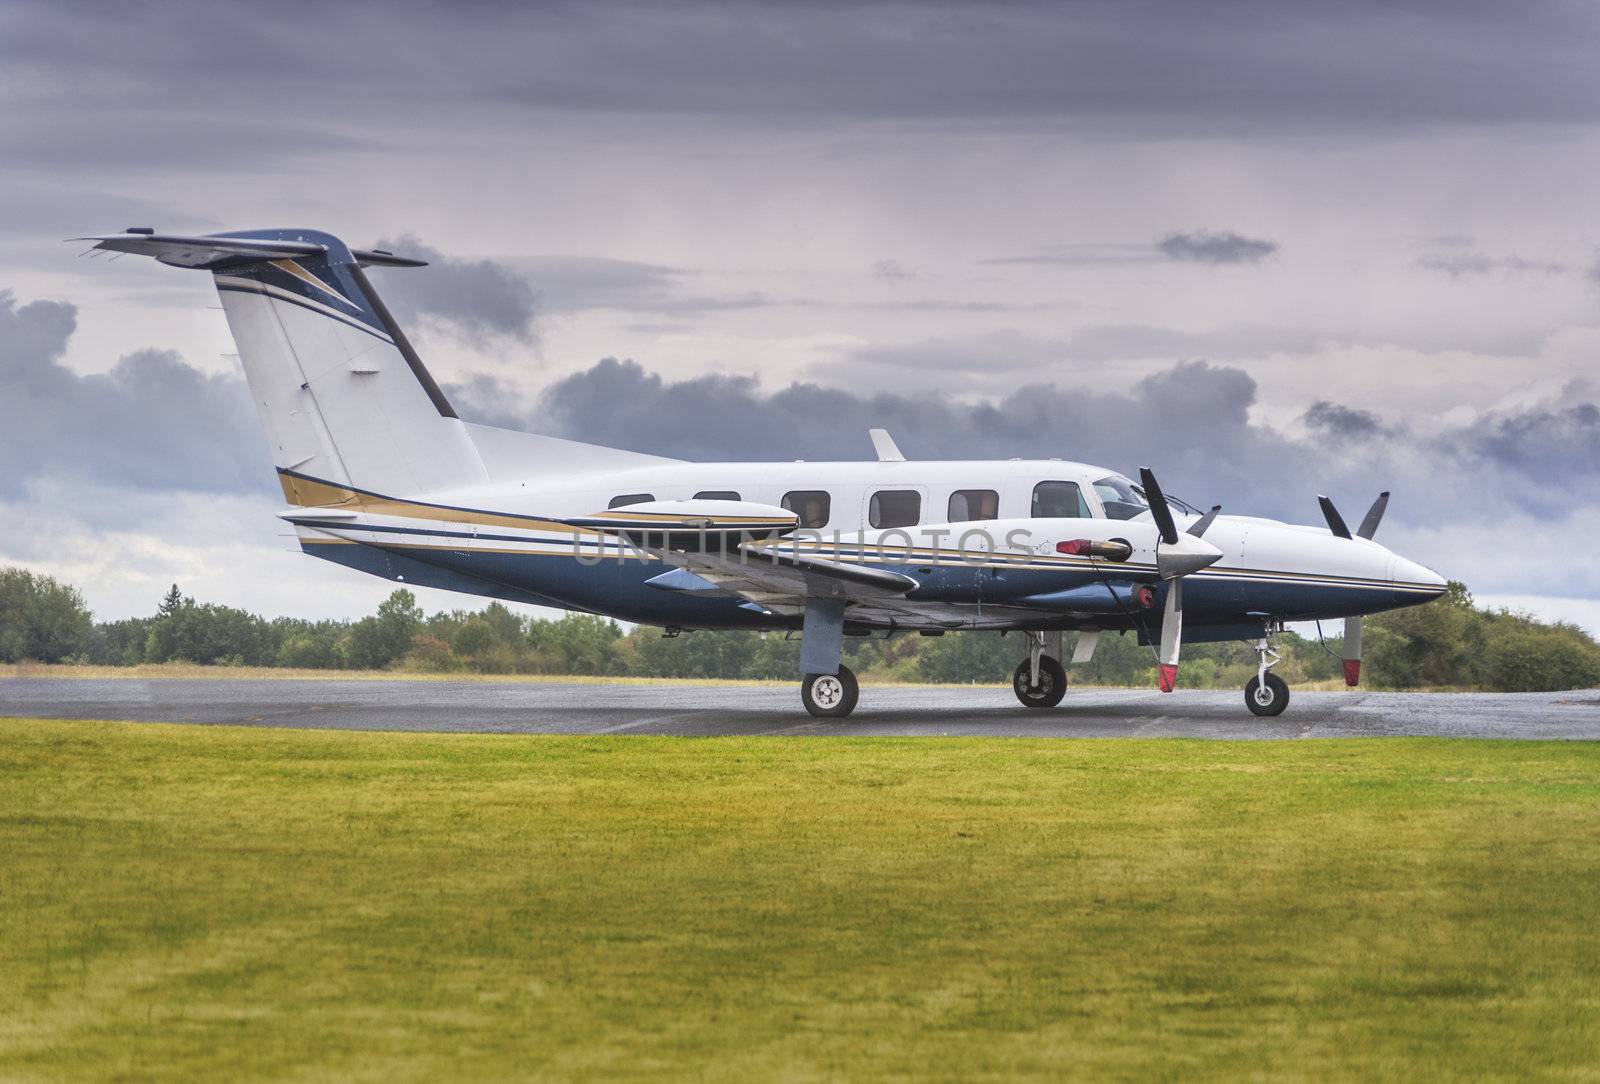 Private propeller plane parking at rural airport